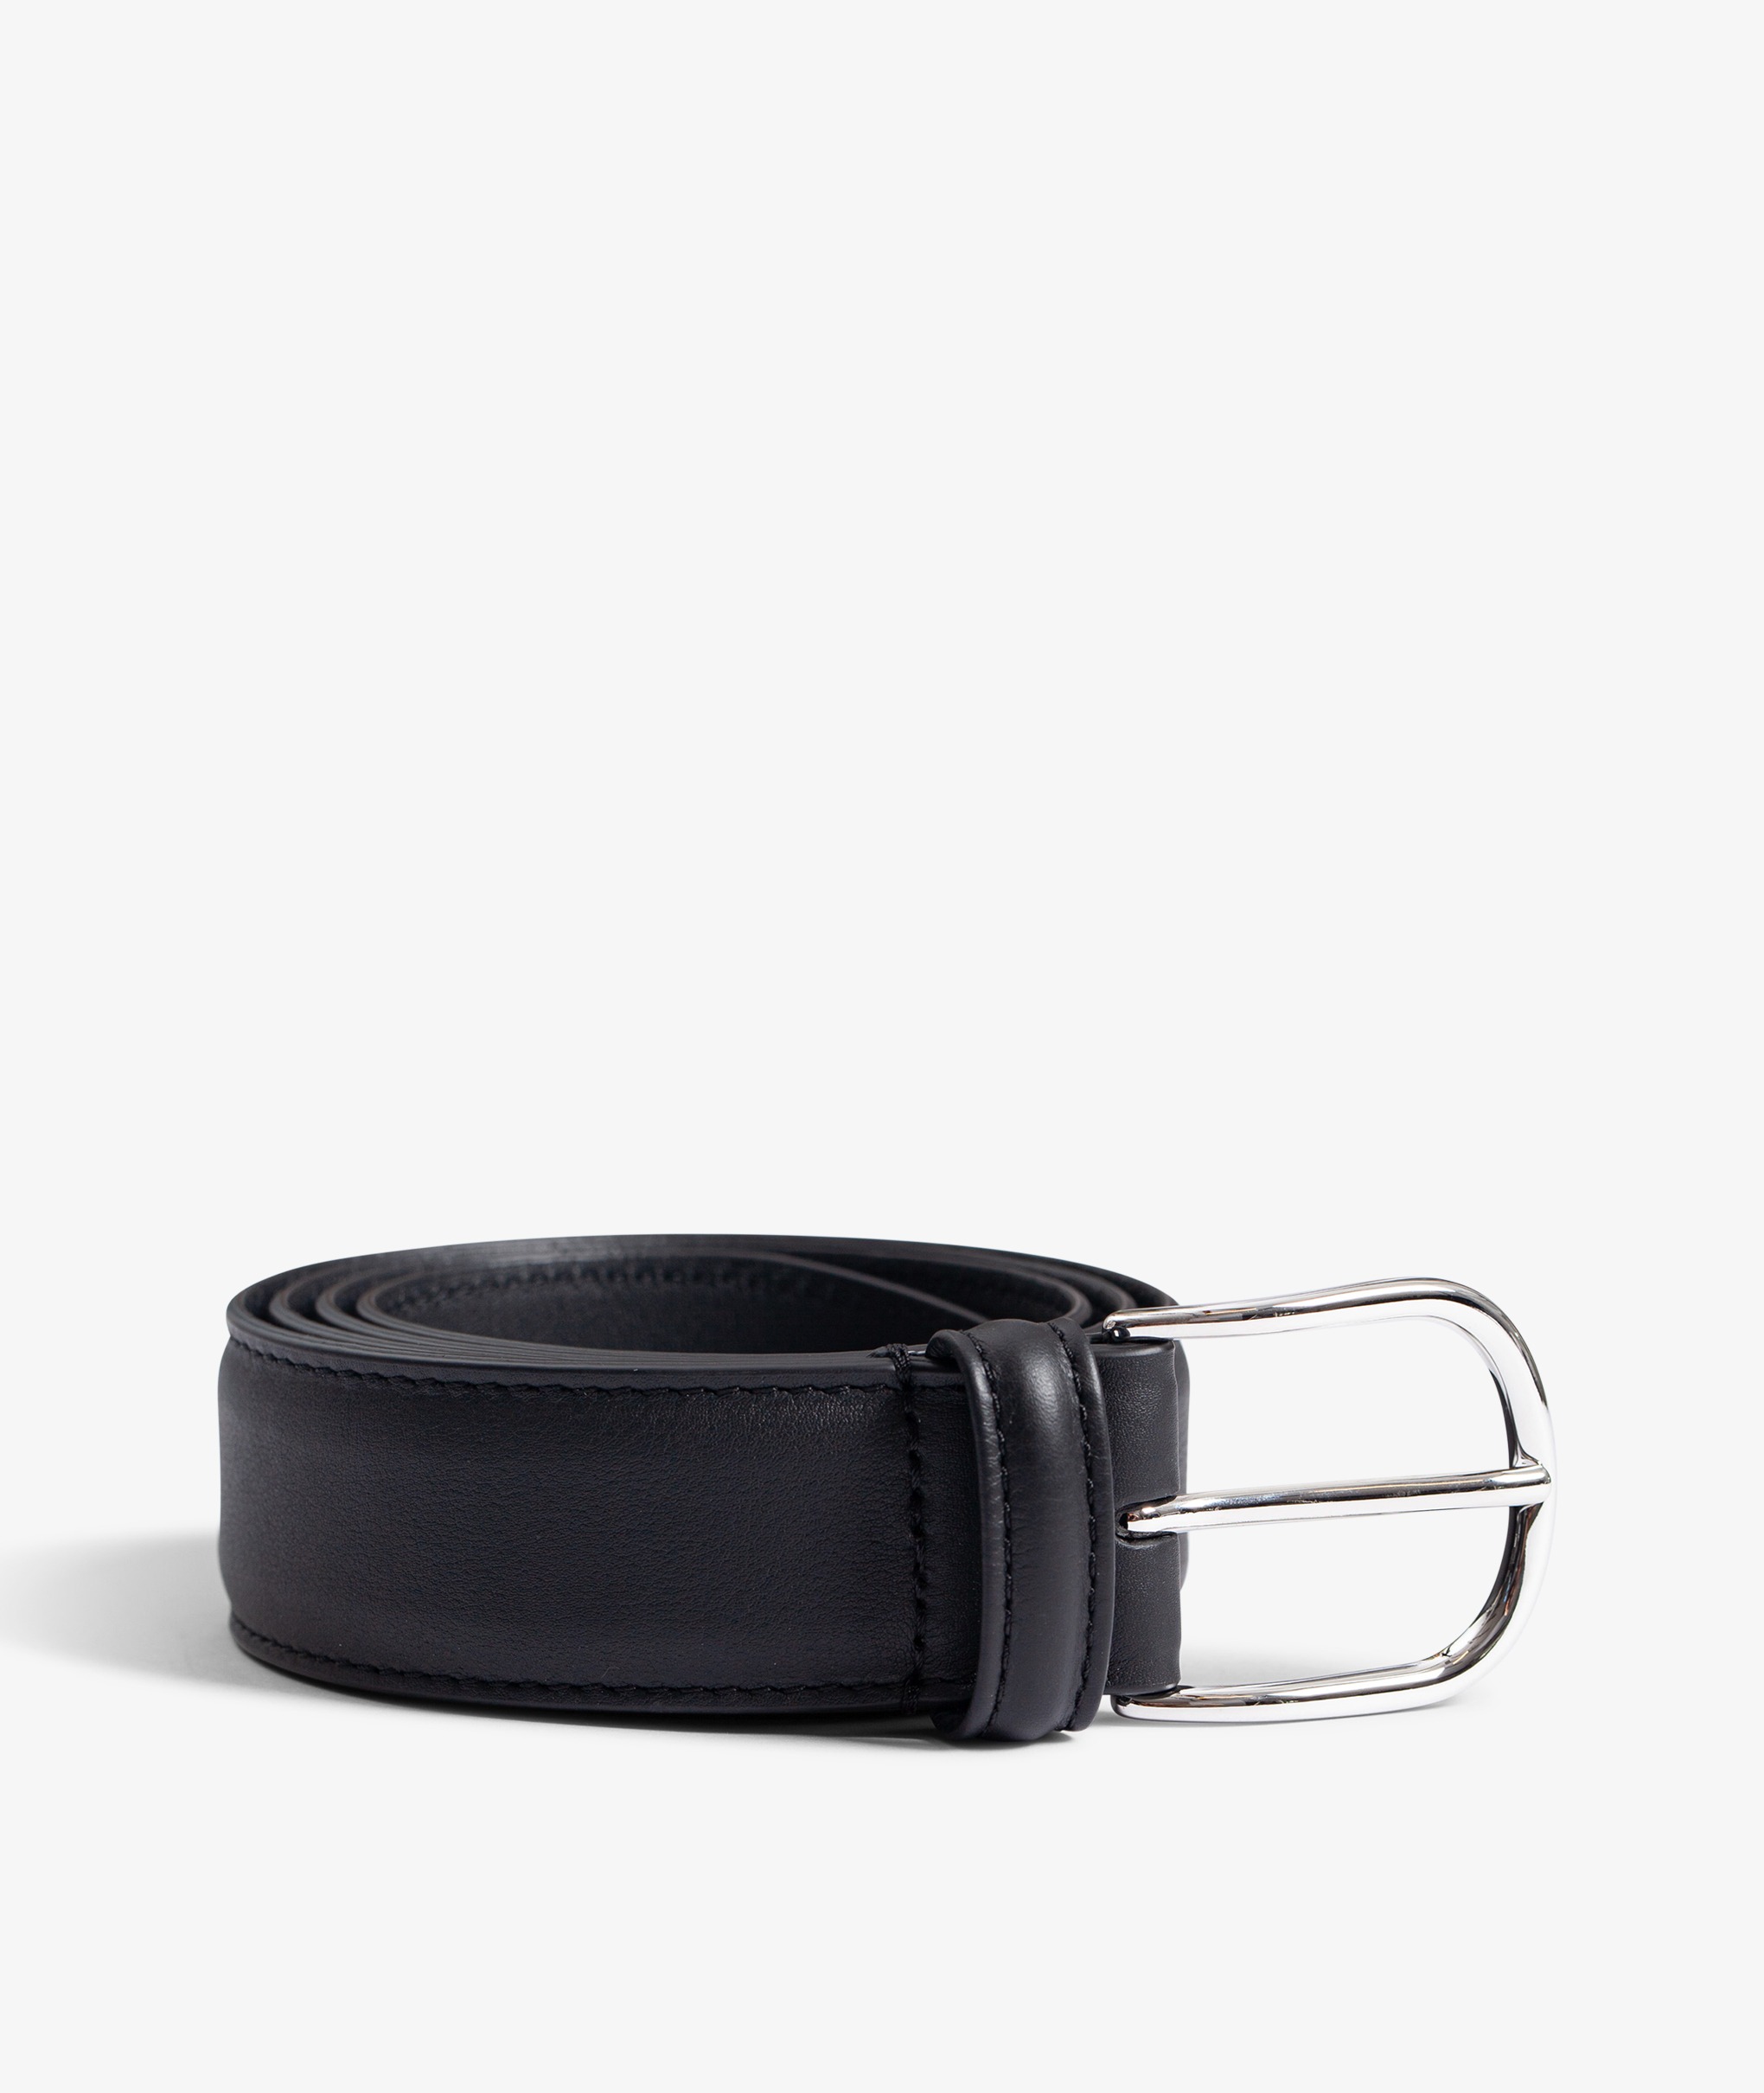 Norse Store  Shipping Worldwide - Anderson's Classic Leather Belt - Black